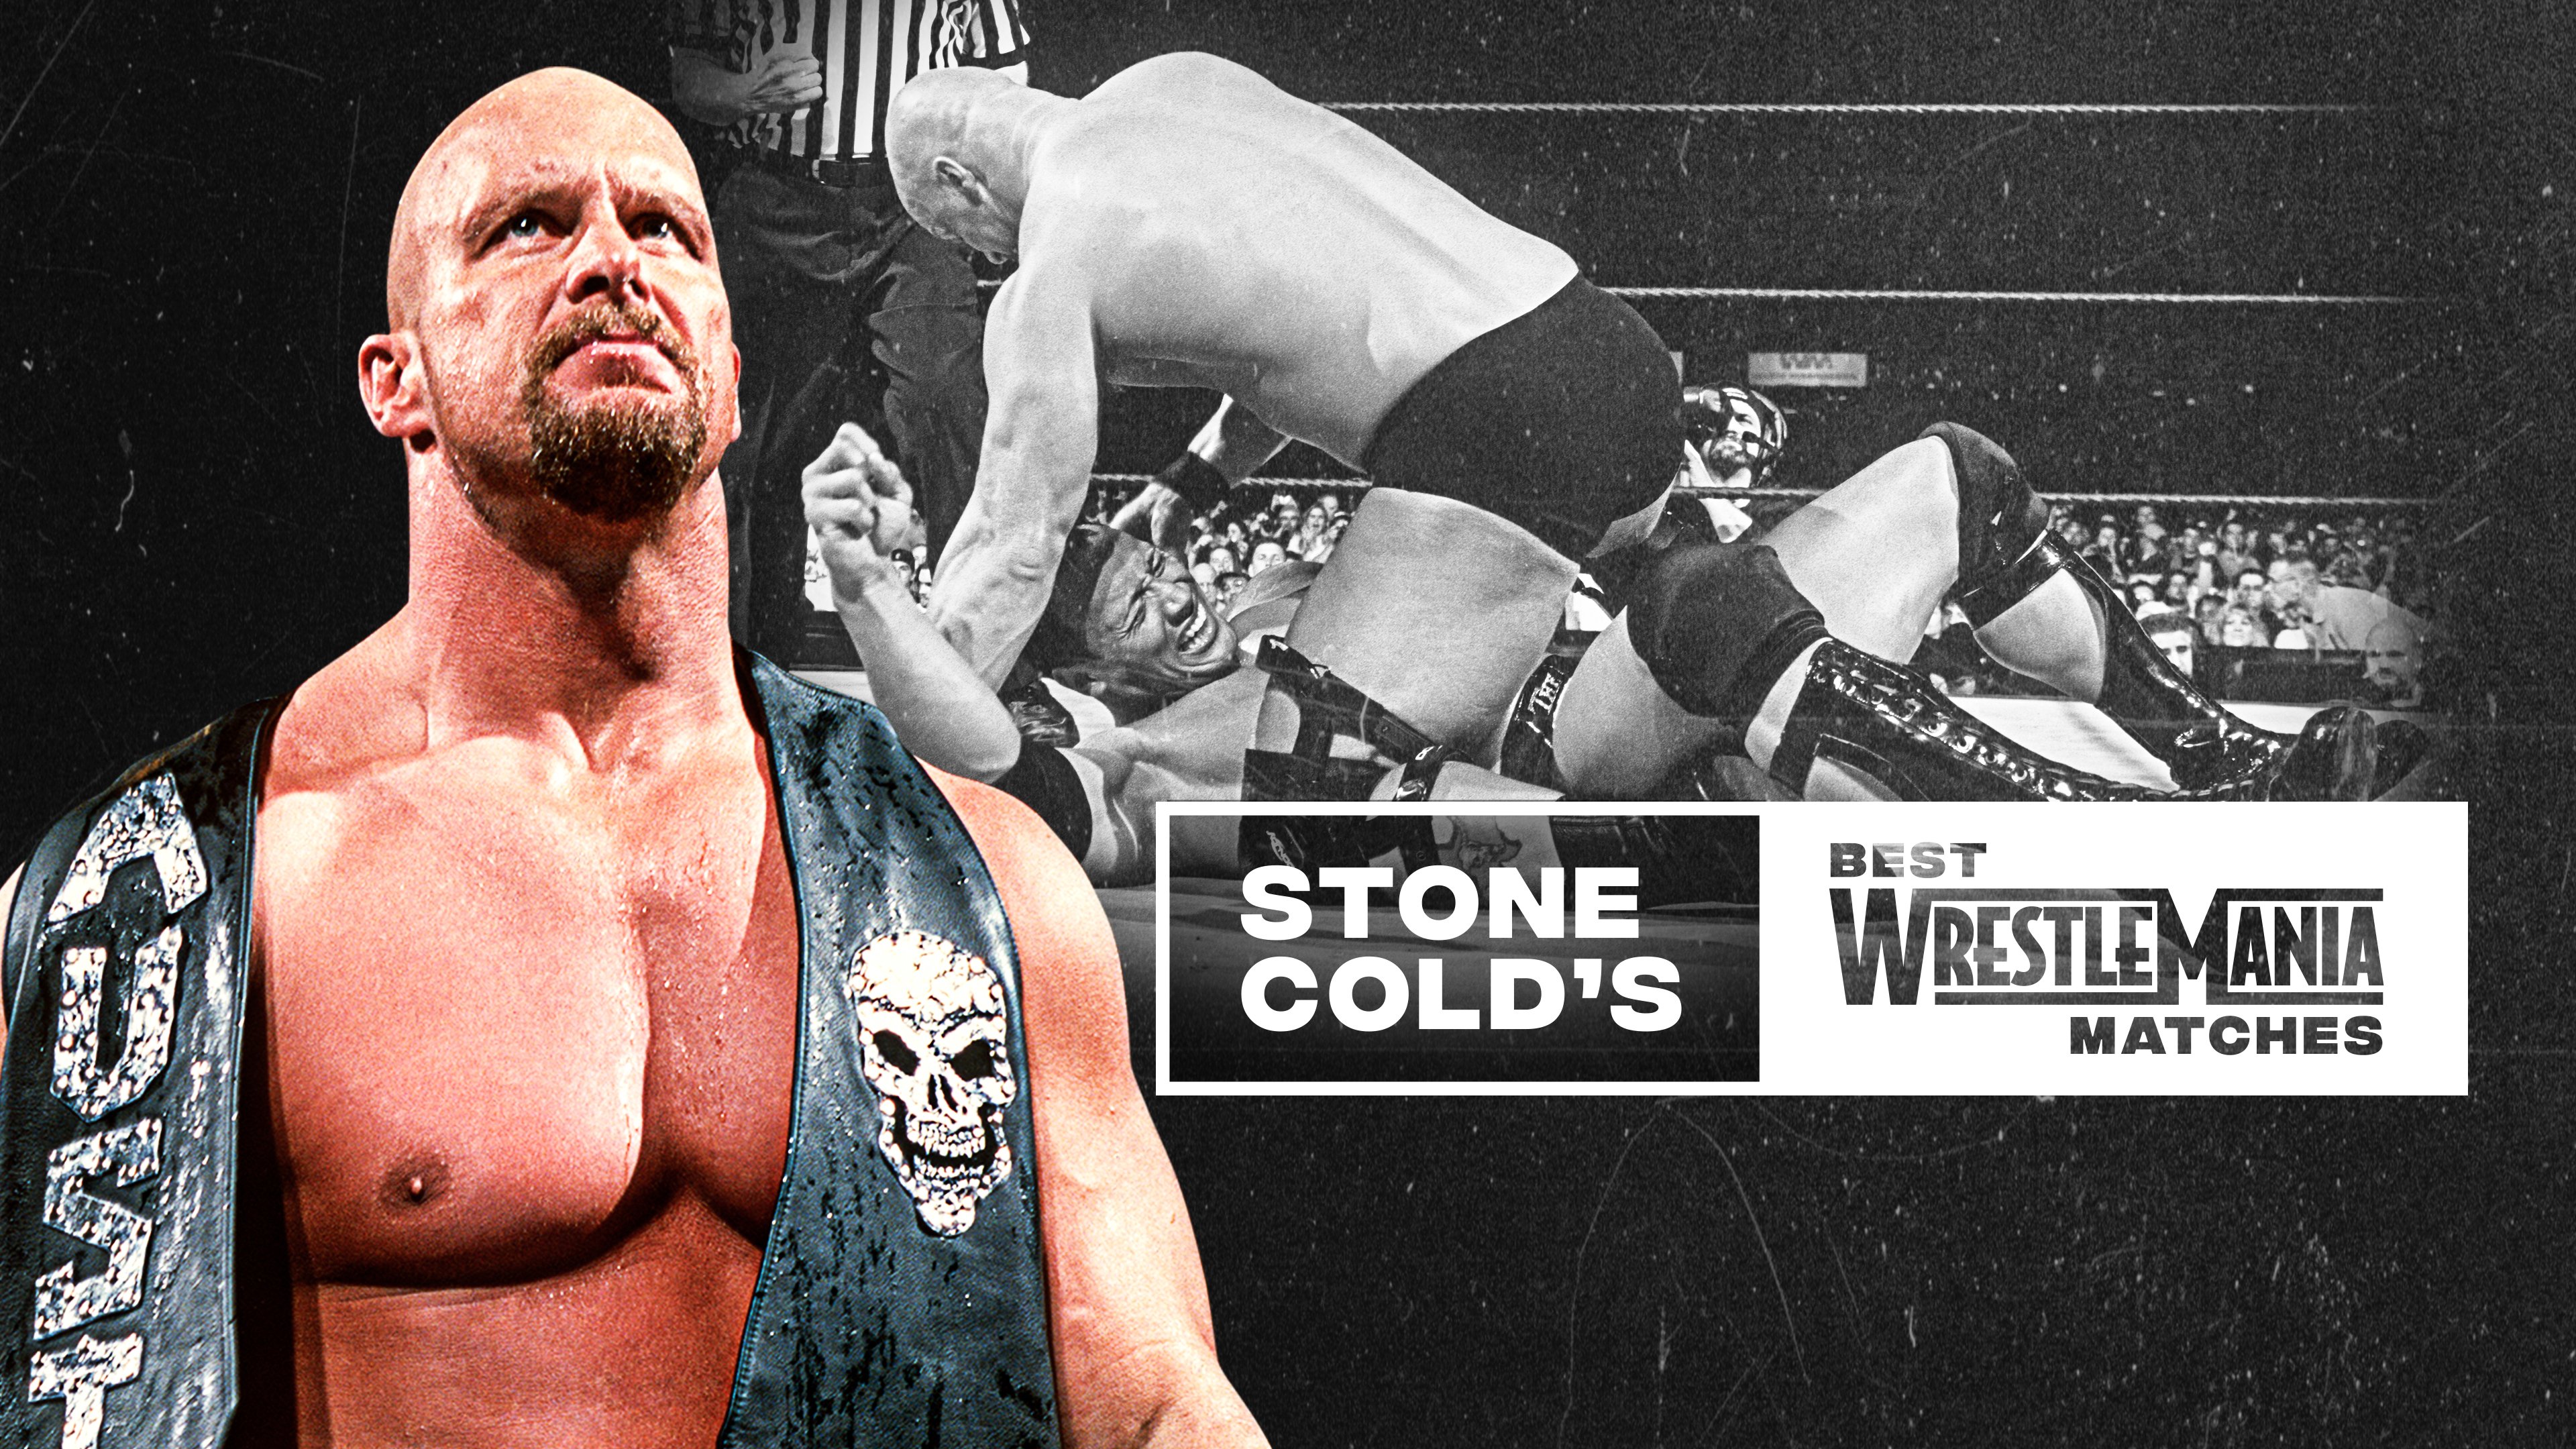 Stone Cold's" Best WrestleMania Matches.